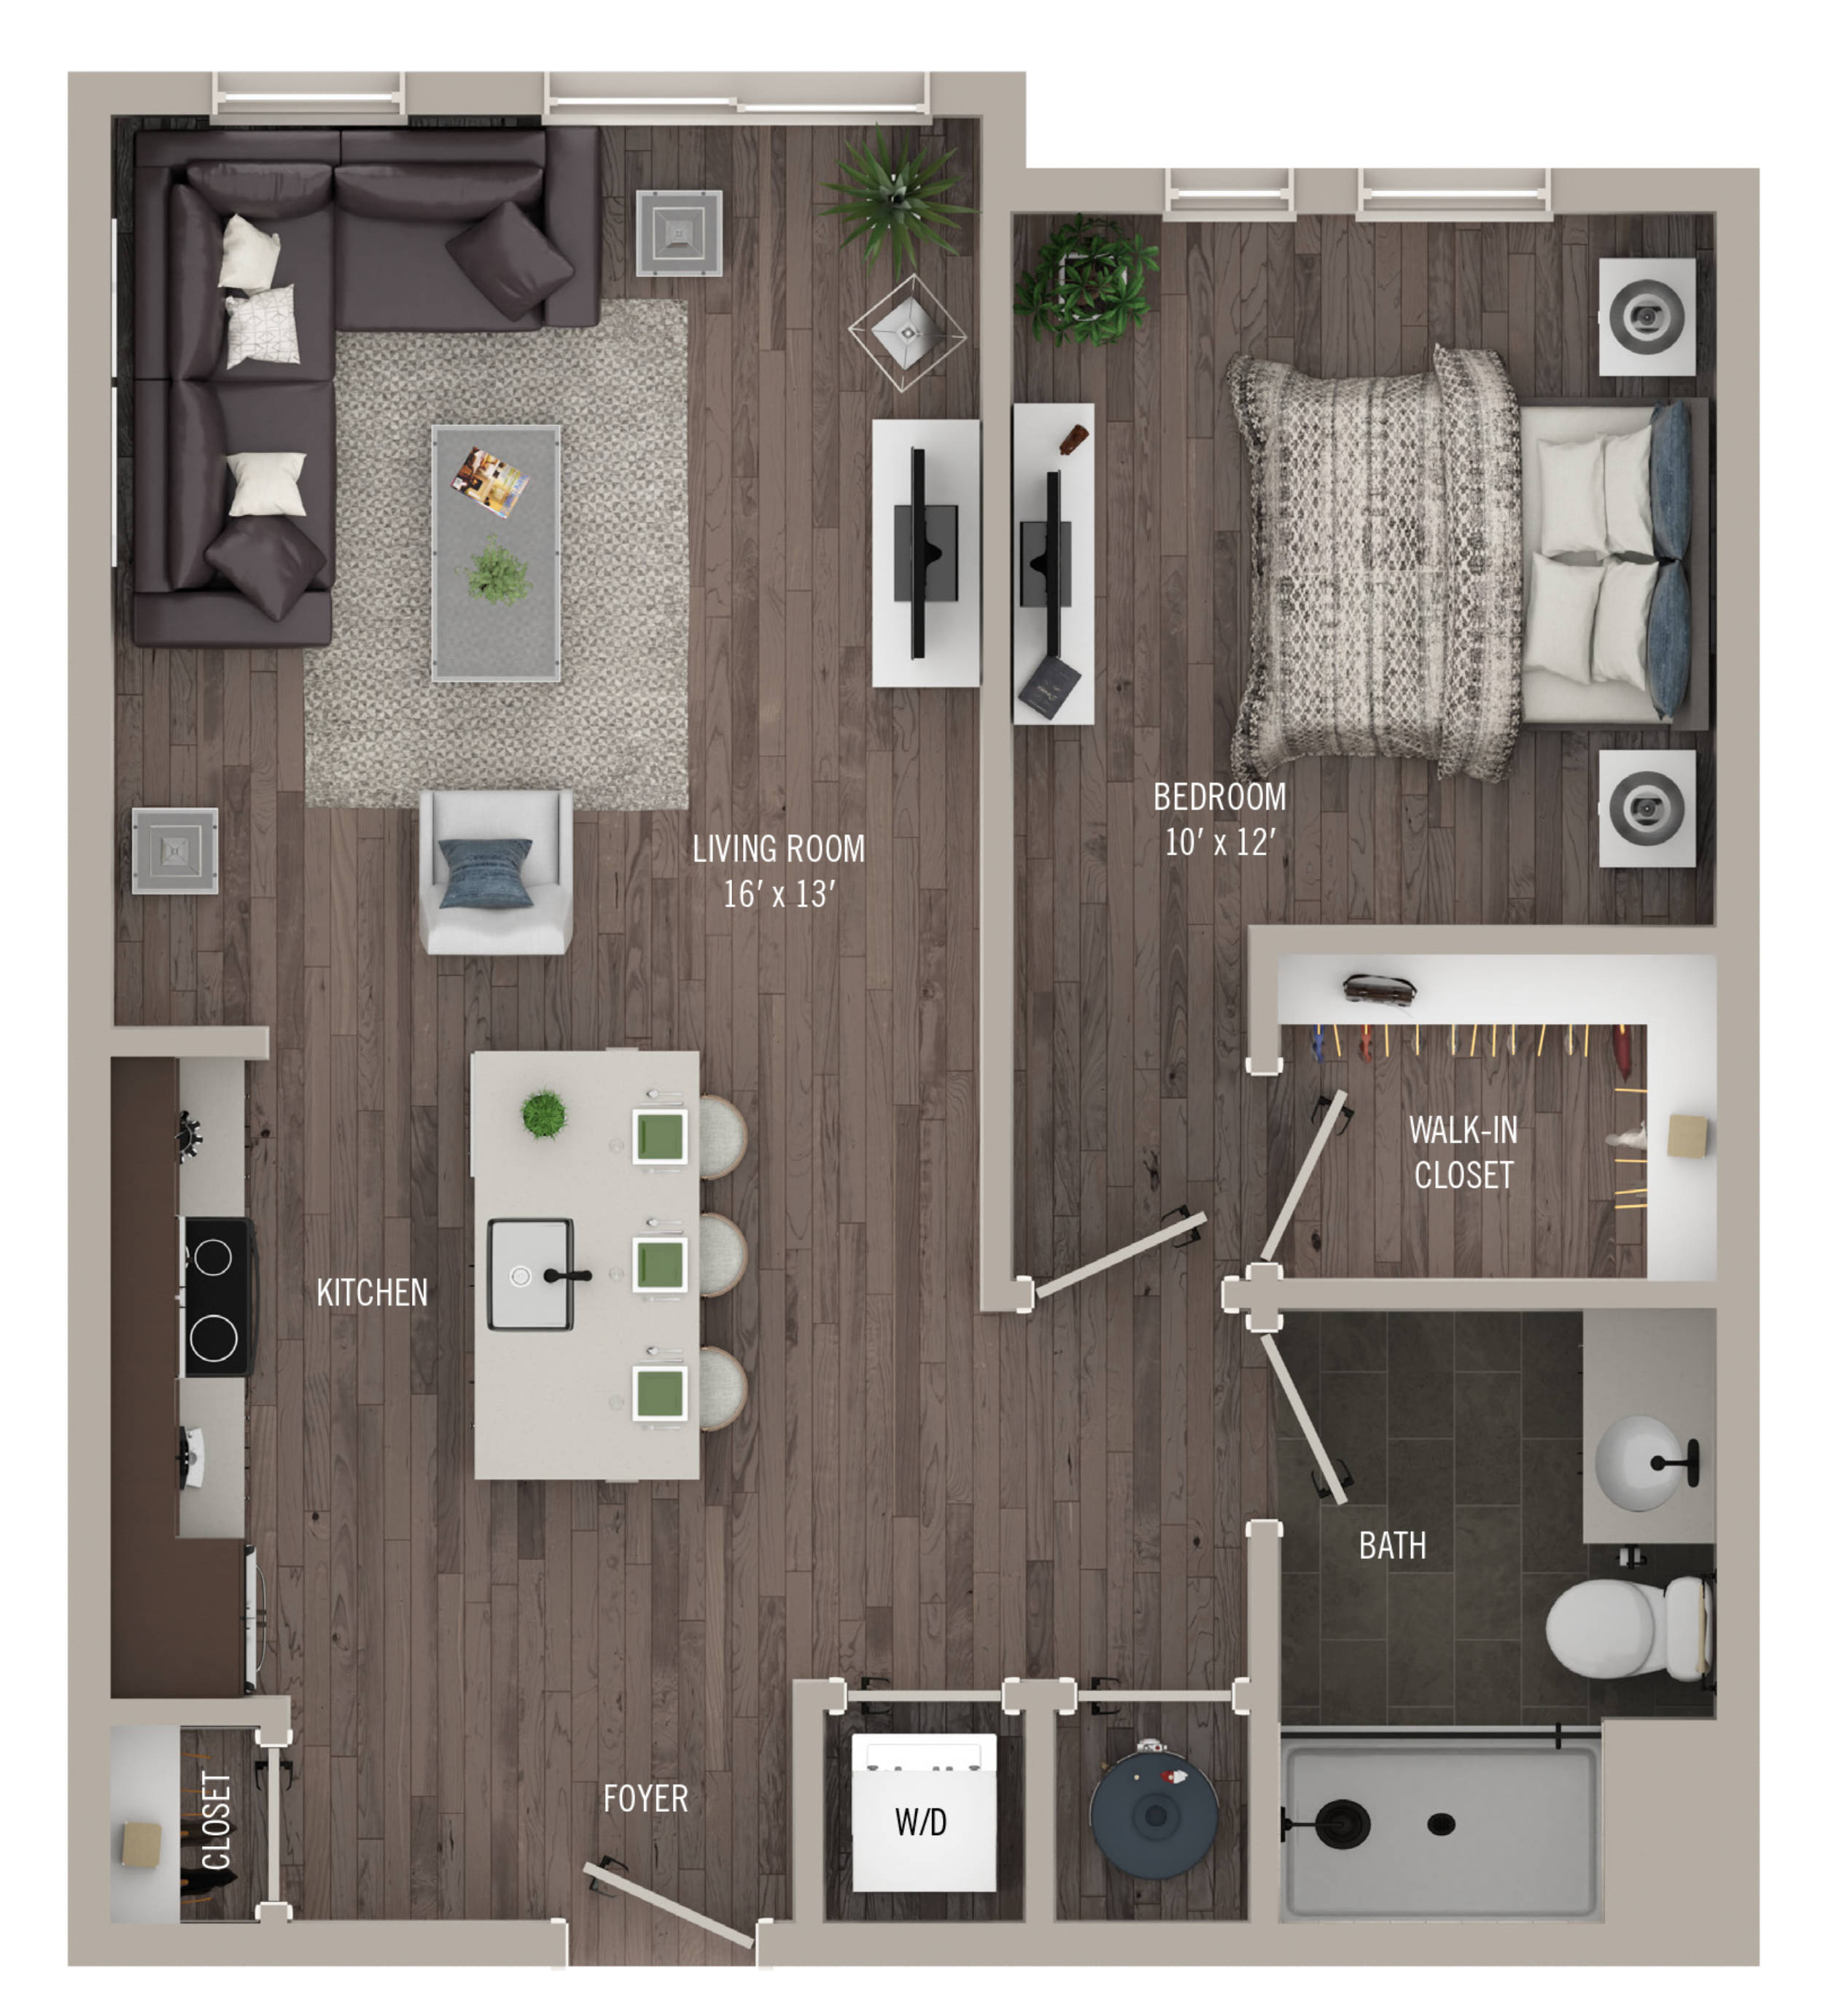 A12 / 50 South Grant / $1,615